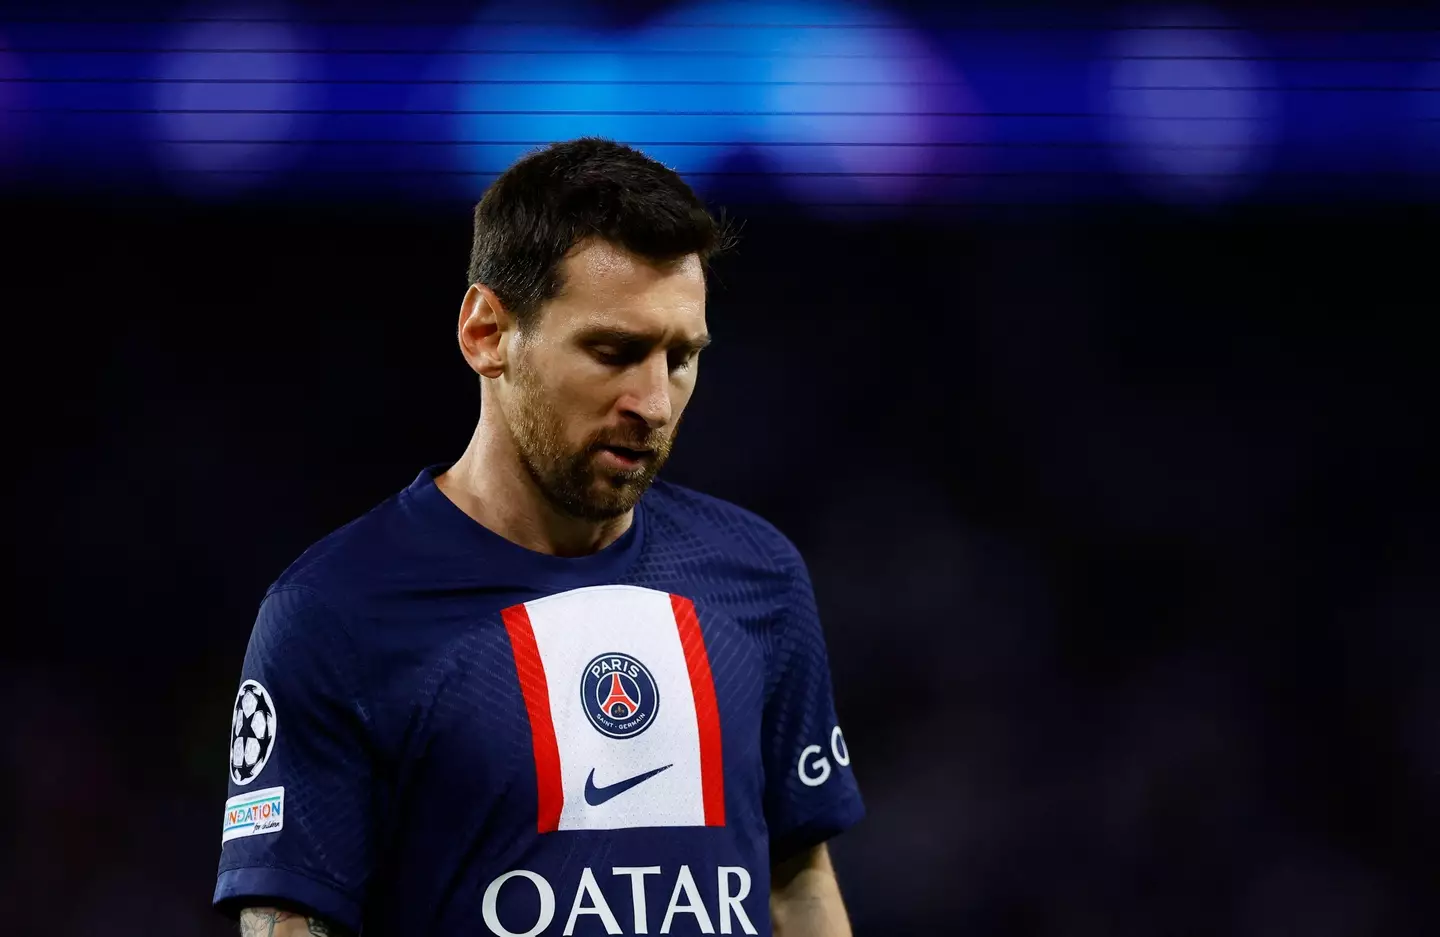 Lionel Messi has reportedly been forced to act as a mediator between Mbappe and Neymar (Image: Alamy)